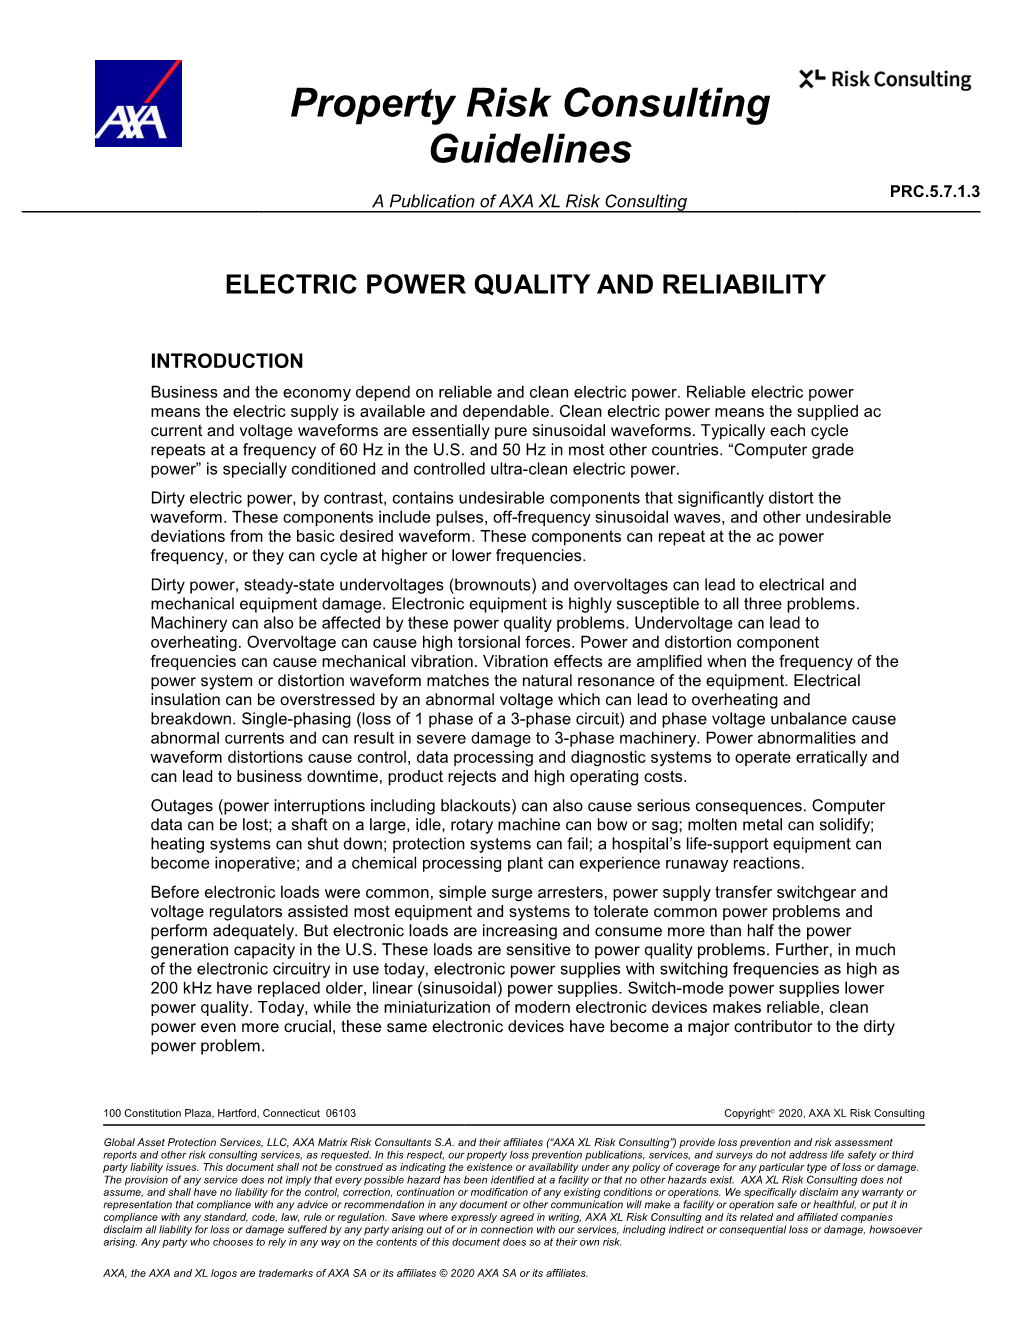 Electric Power Quality and Reliability